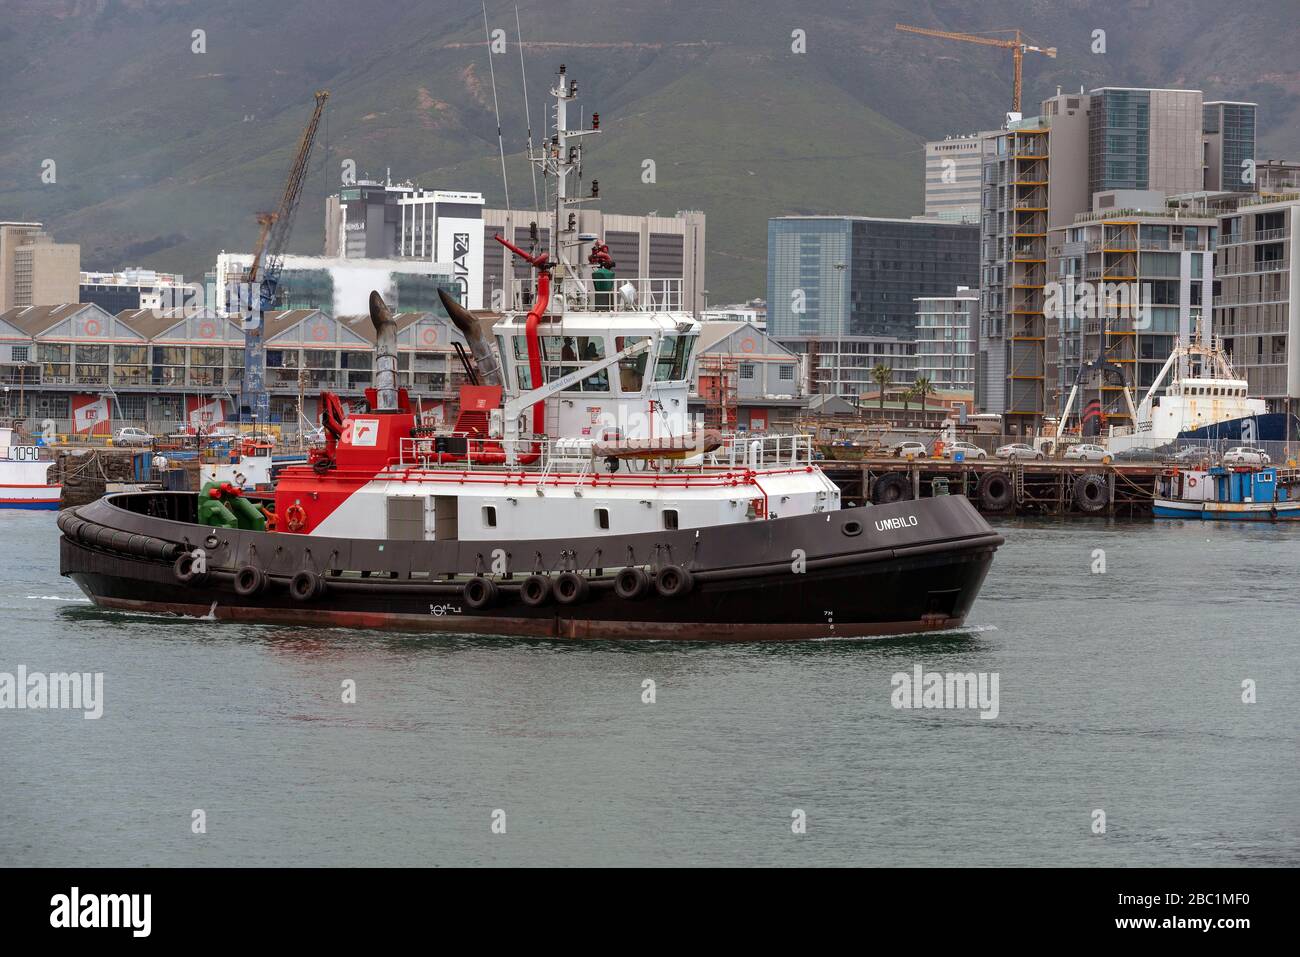 Cape Town, South Africa. 2019. Umbilo a working tug underway on Cape Town Harbour, South Africa. Stock Photo